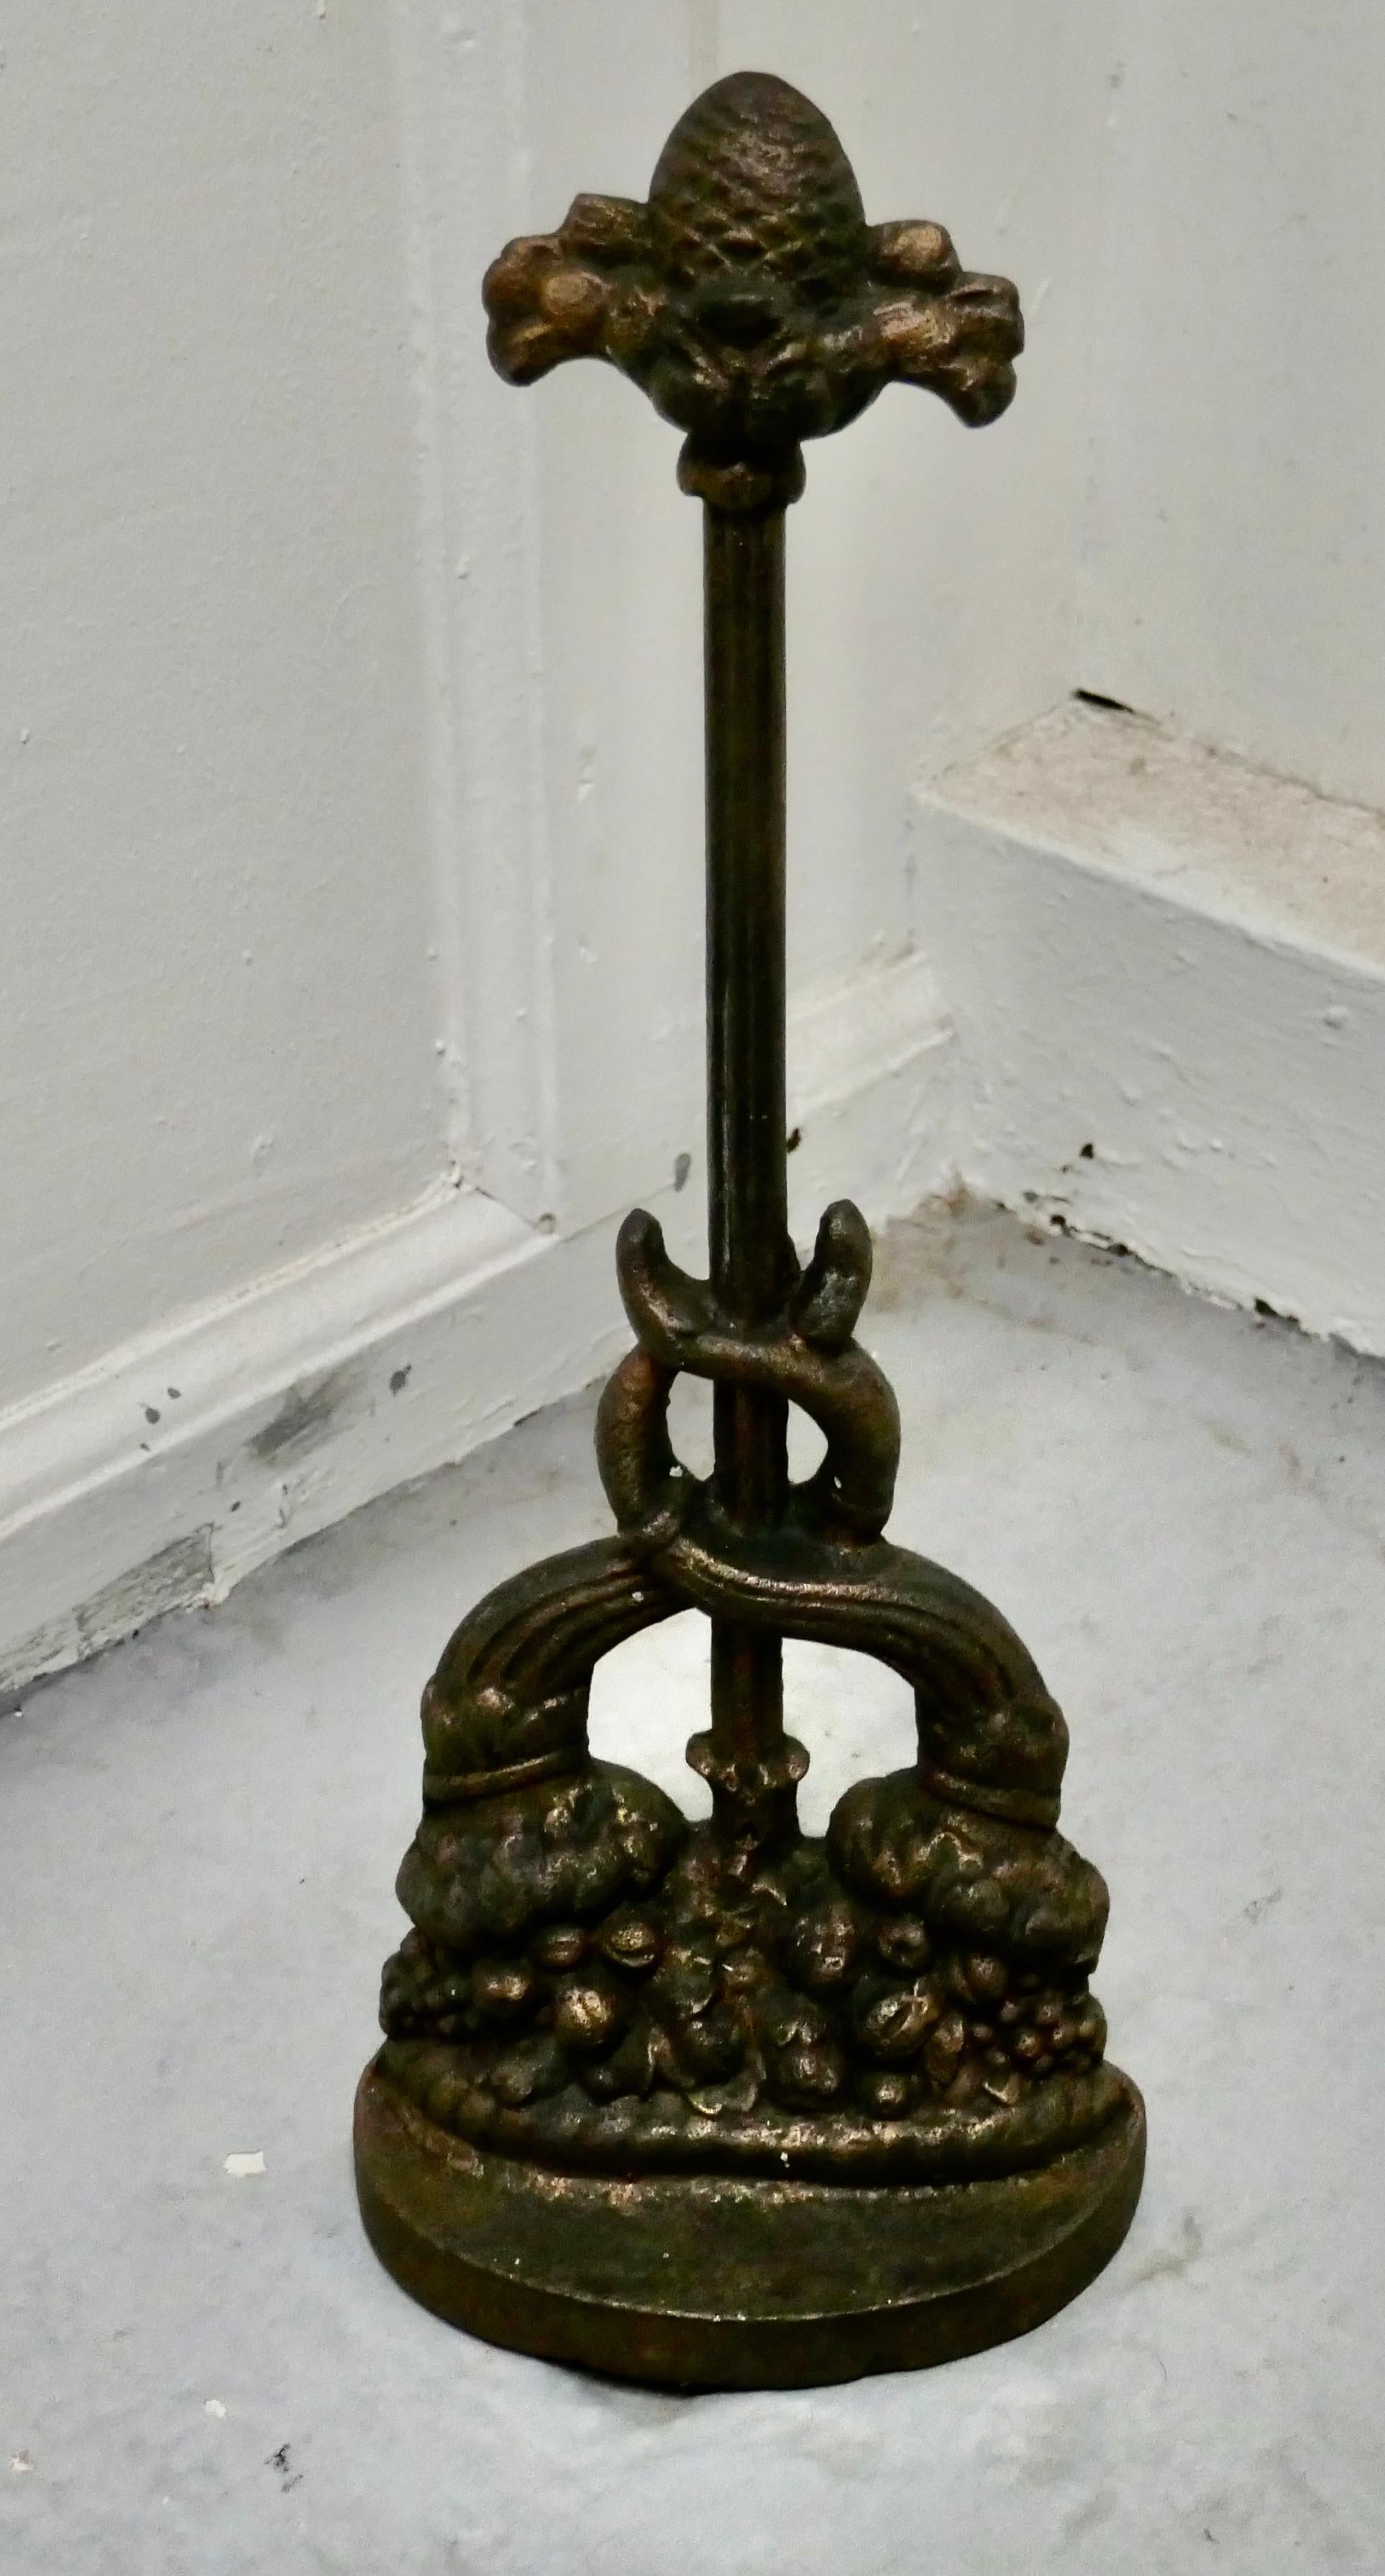 19th century cast iron door stop by the Baldwin Foundry

Needless to say a heavy piece which though worn with age still retains some of its original gilded finish
At the top there is an acorn, and the base is in the form of woodland fruits and